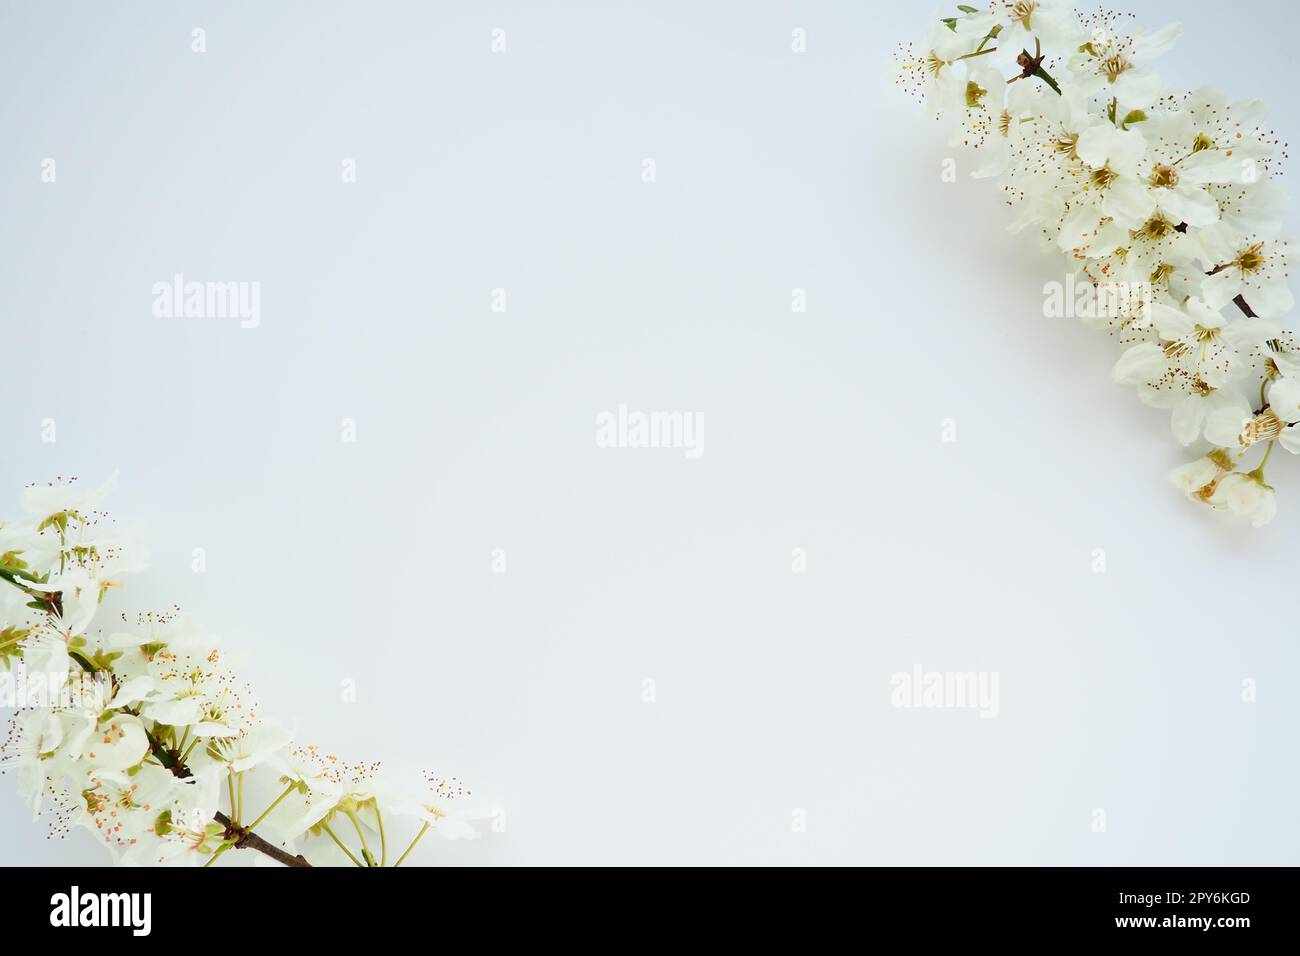 Bird cherry, cherry or sweet cherry flowers on a white background. Copy space for text. Spring flowers on a plain white sheet of paper. Two branches with flowers along the edges diagonally. Stock Photo